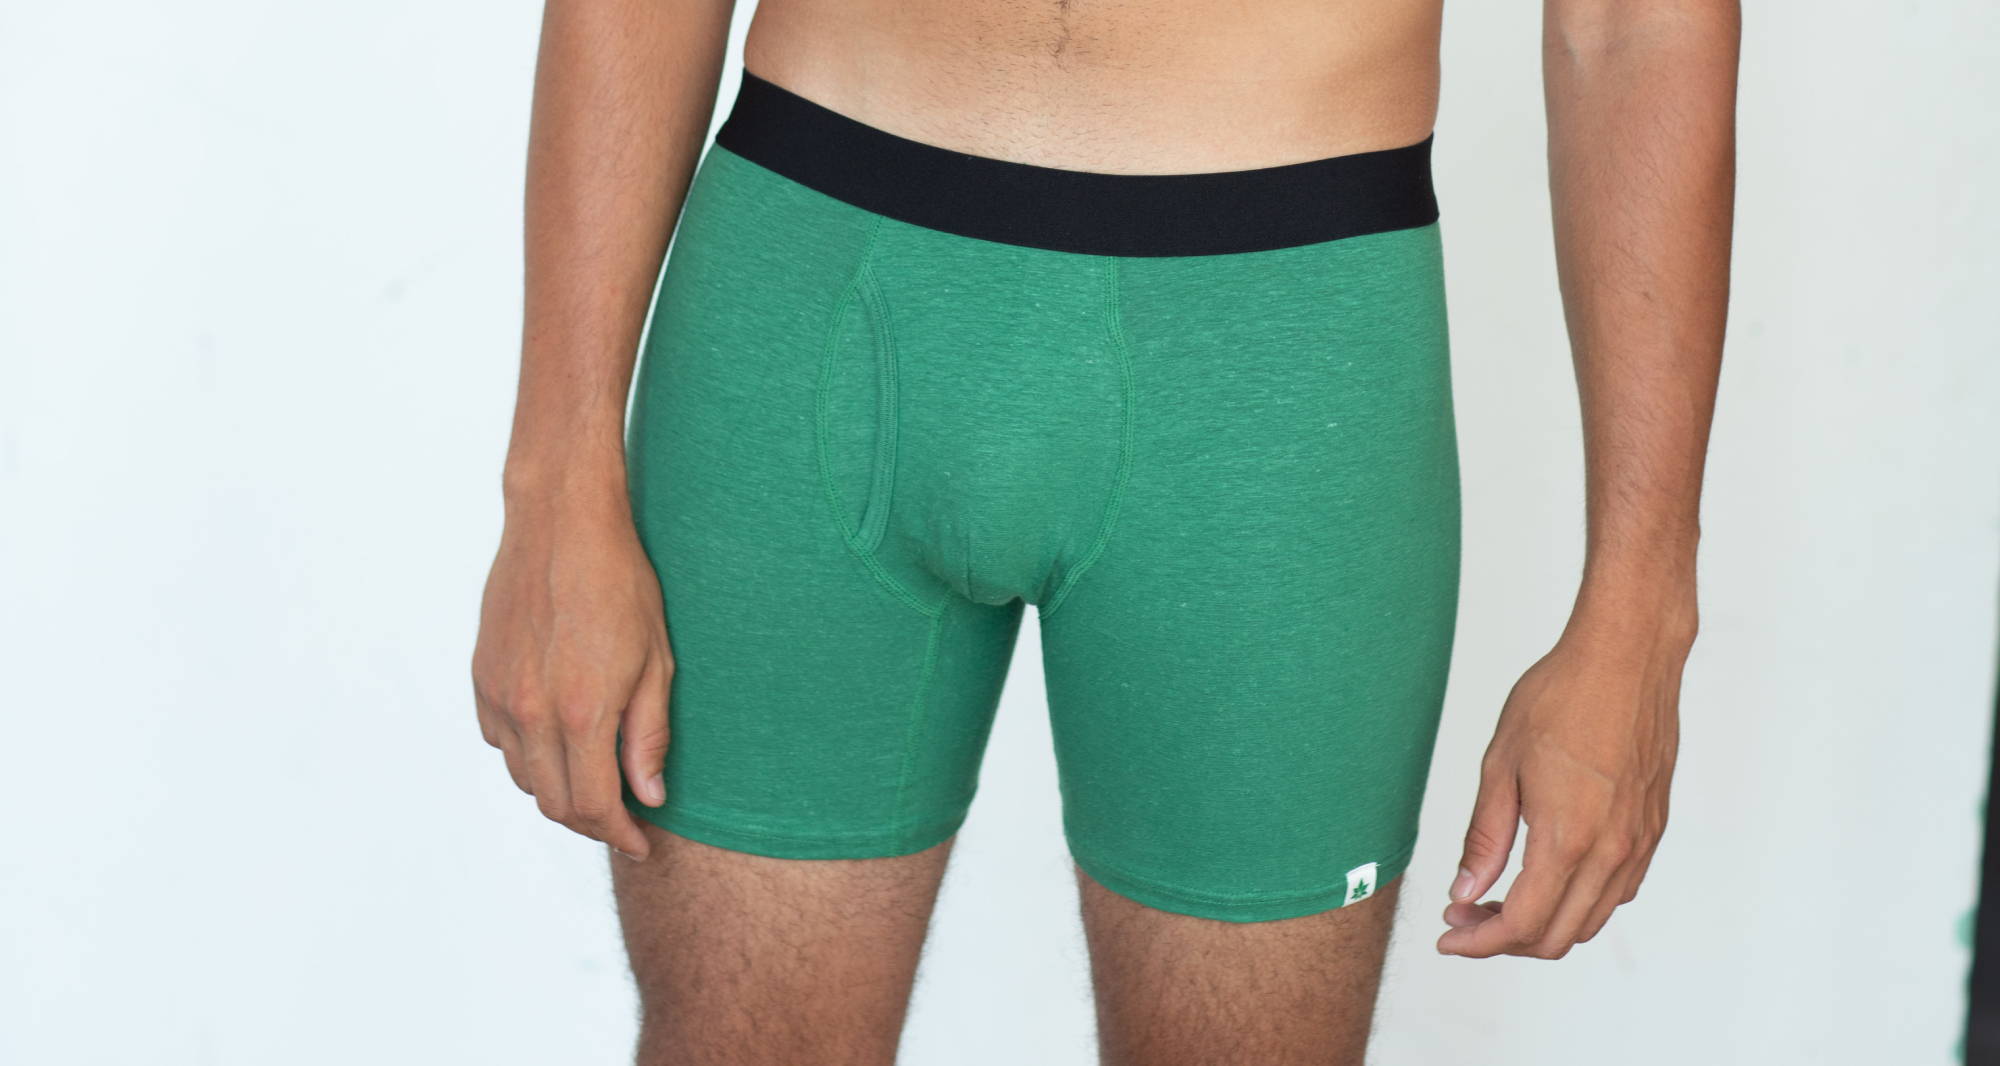 A close-up of a man’s torso and crotch in a pair of green boxer briefs.